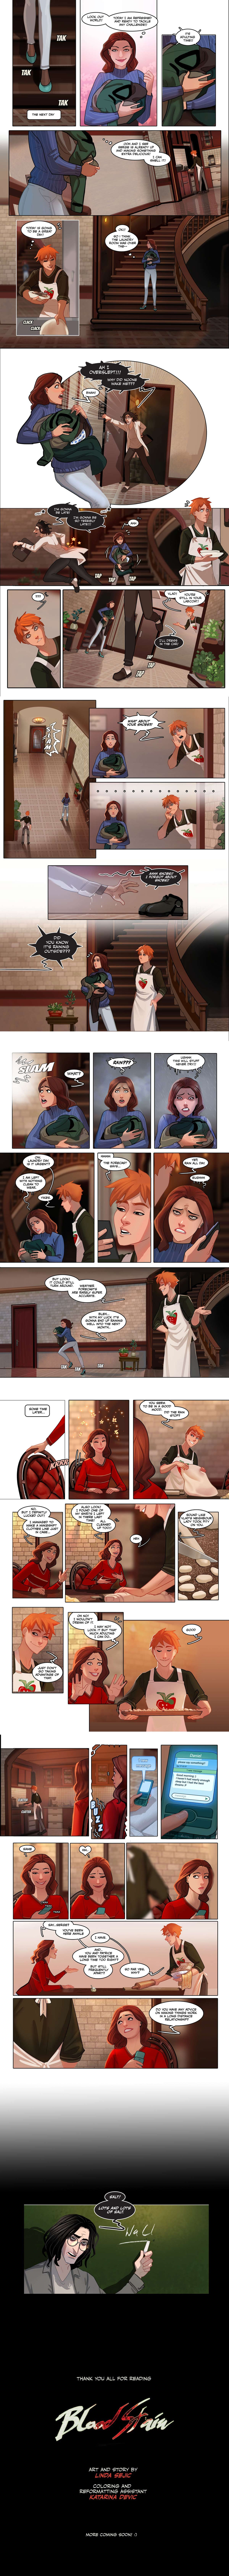 Blood Stain ch. 4 (ongoing) [Linda Sejic / Sigeel] 27